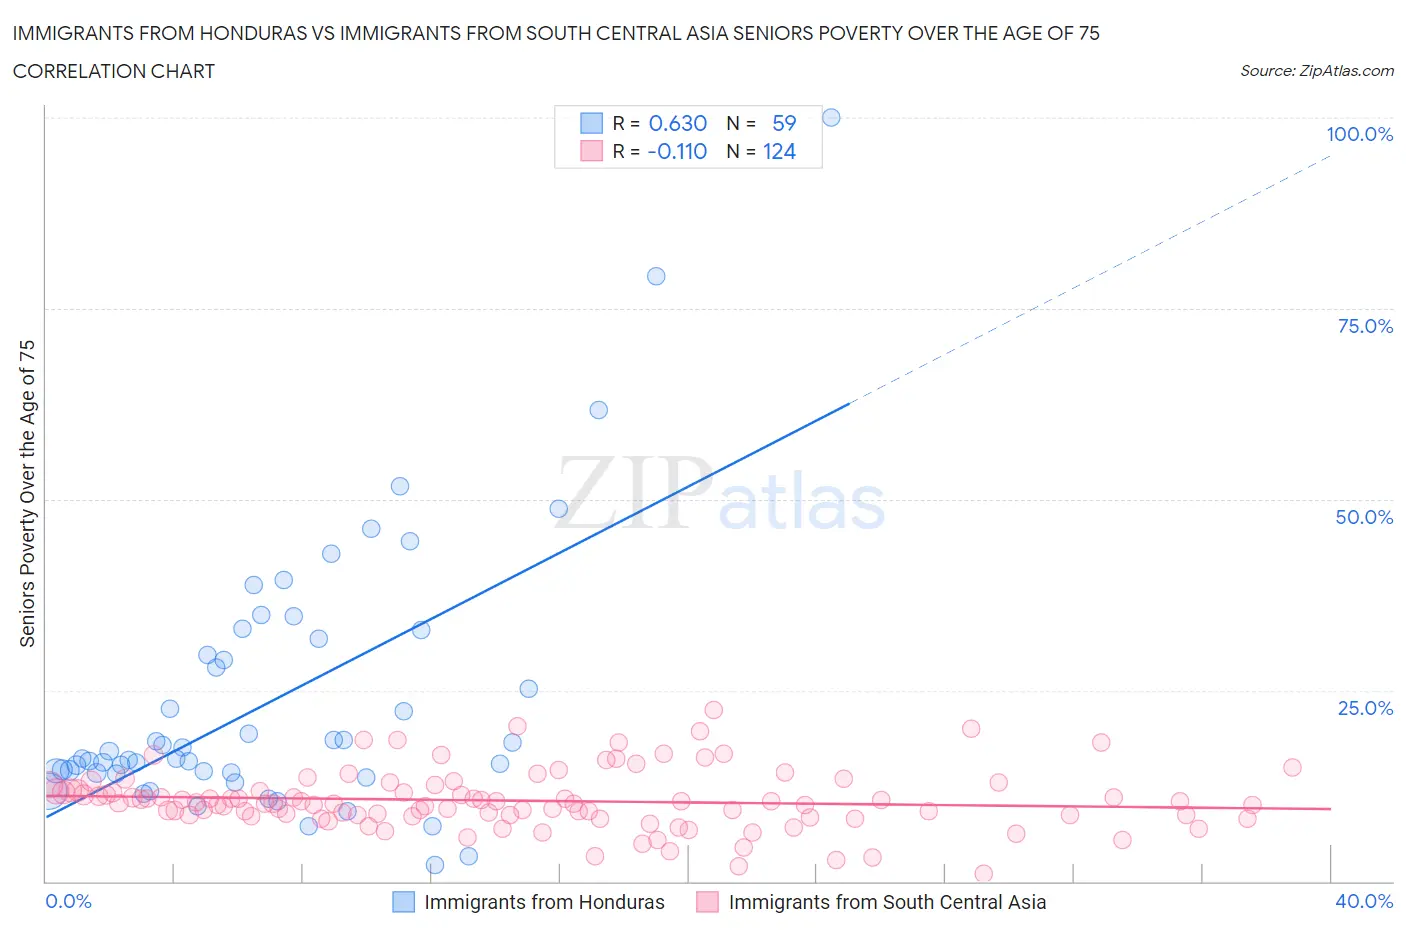 Immigrants from Honduras vs Immigrants from South Central Asia Seniors Poverty Over the Age of 75